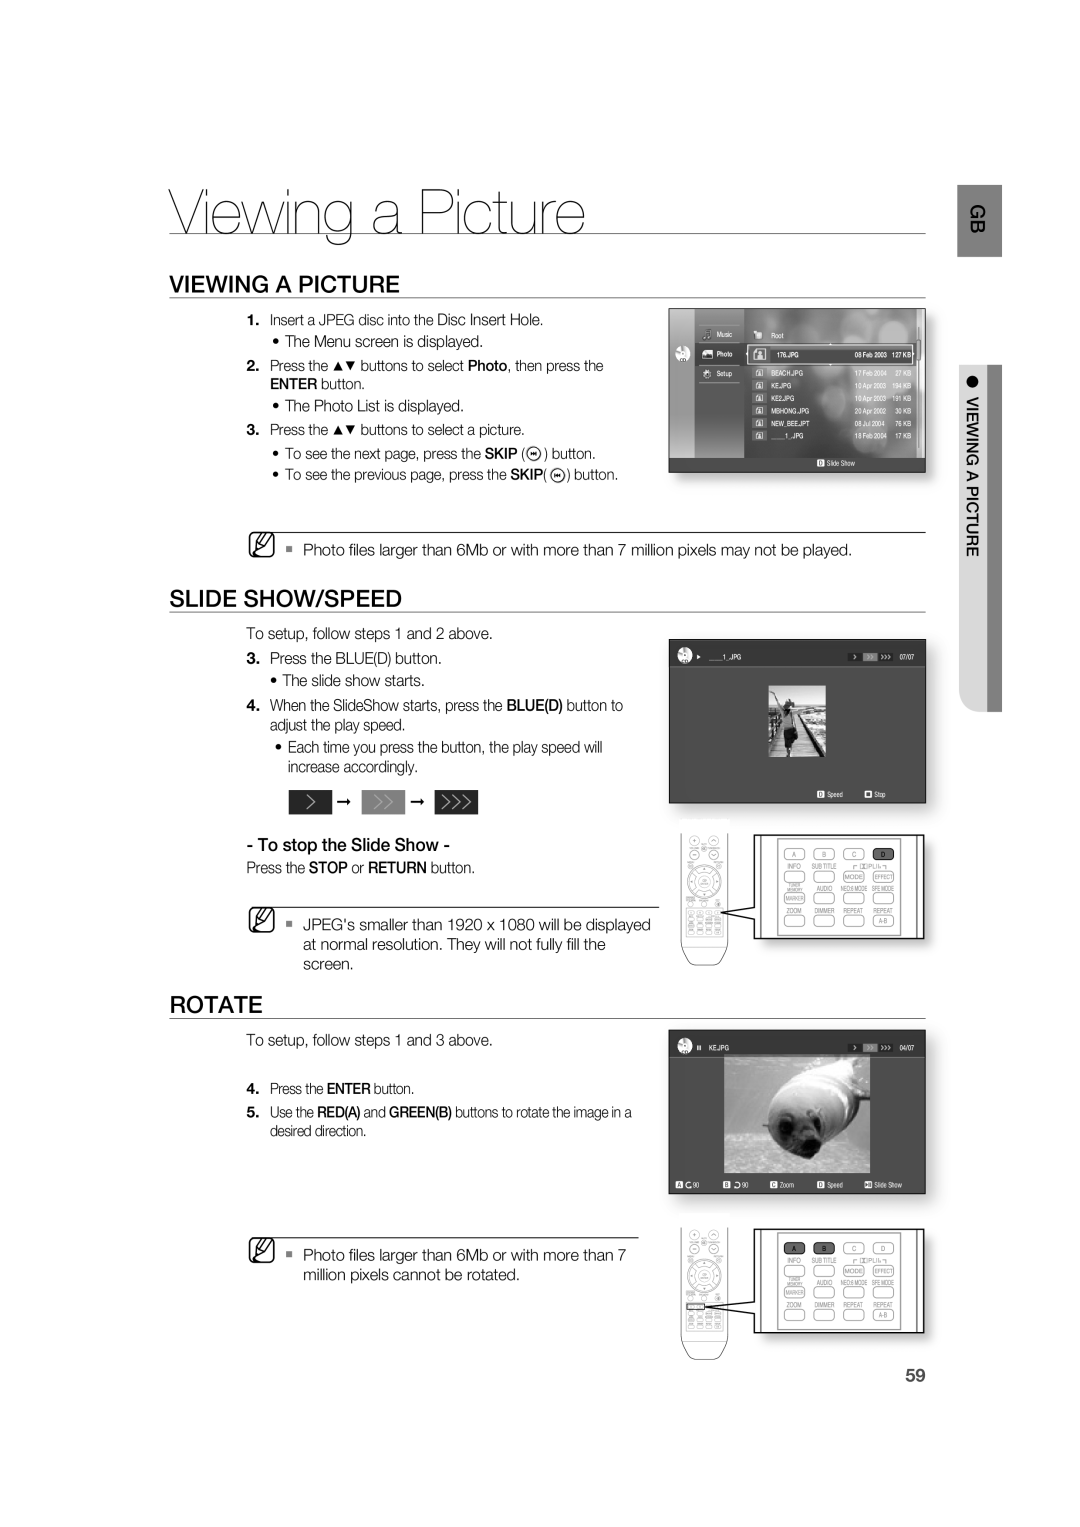 Samsung AH68-02019K Viewing a Picture, Viewing A Picture, Slide Show/Speed, Rotate, To setup, follow steps 1 and 3 above 